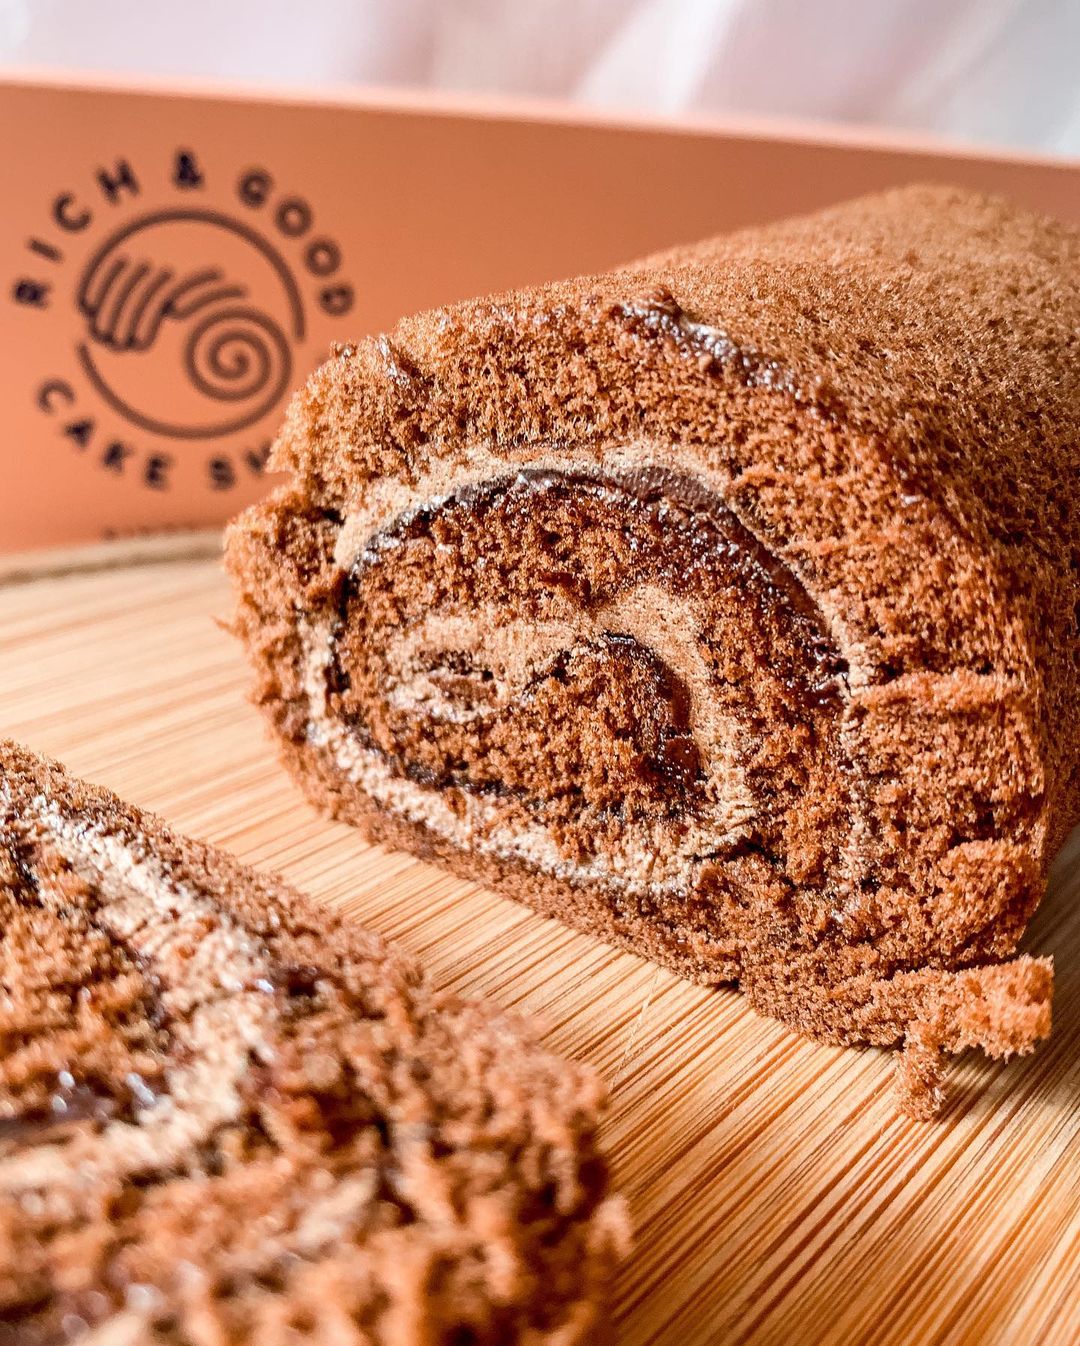 rich-and-good-cake-shop-chocolate-swiss-roll